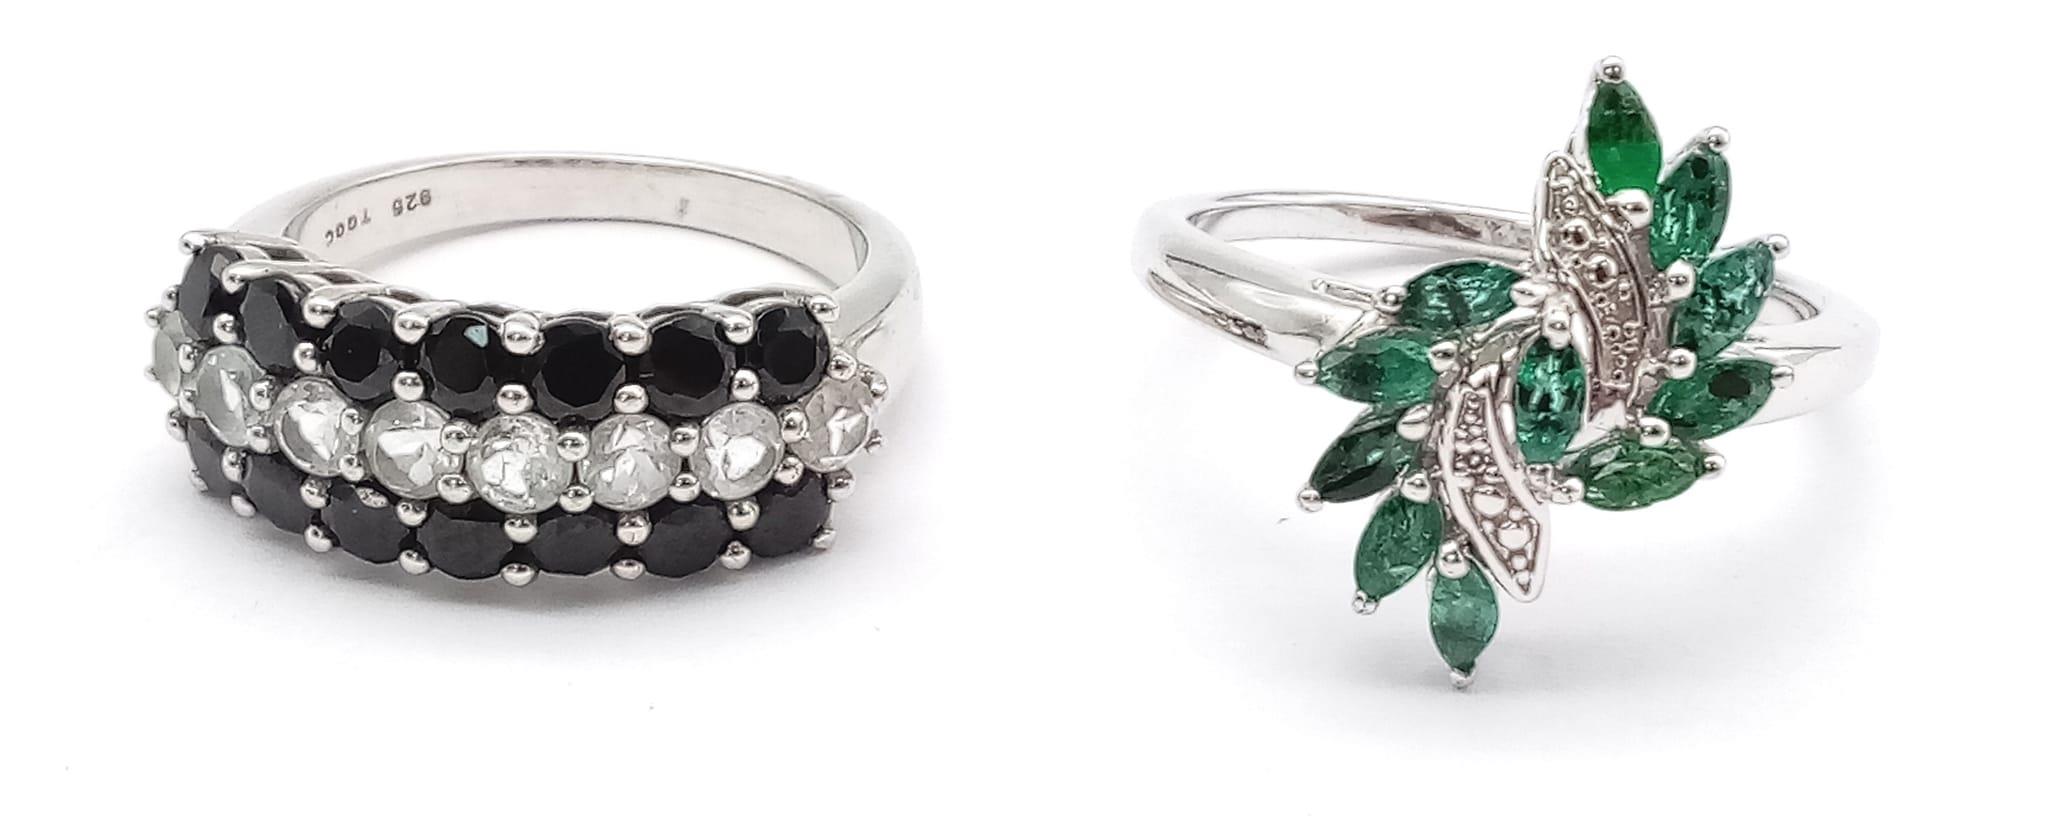 Two 925 Sterling Silver Gemstone Rings: Sapphire - Size P and Emerald - Size -R. - Image 3 of 6